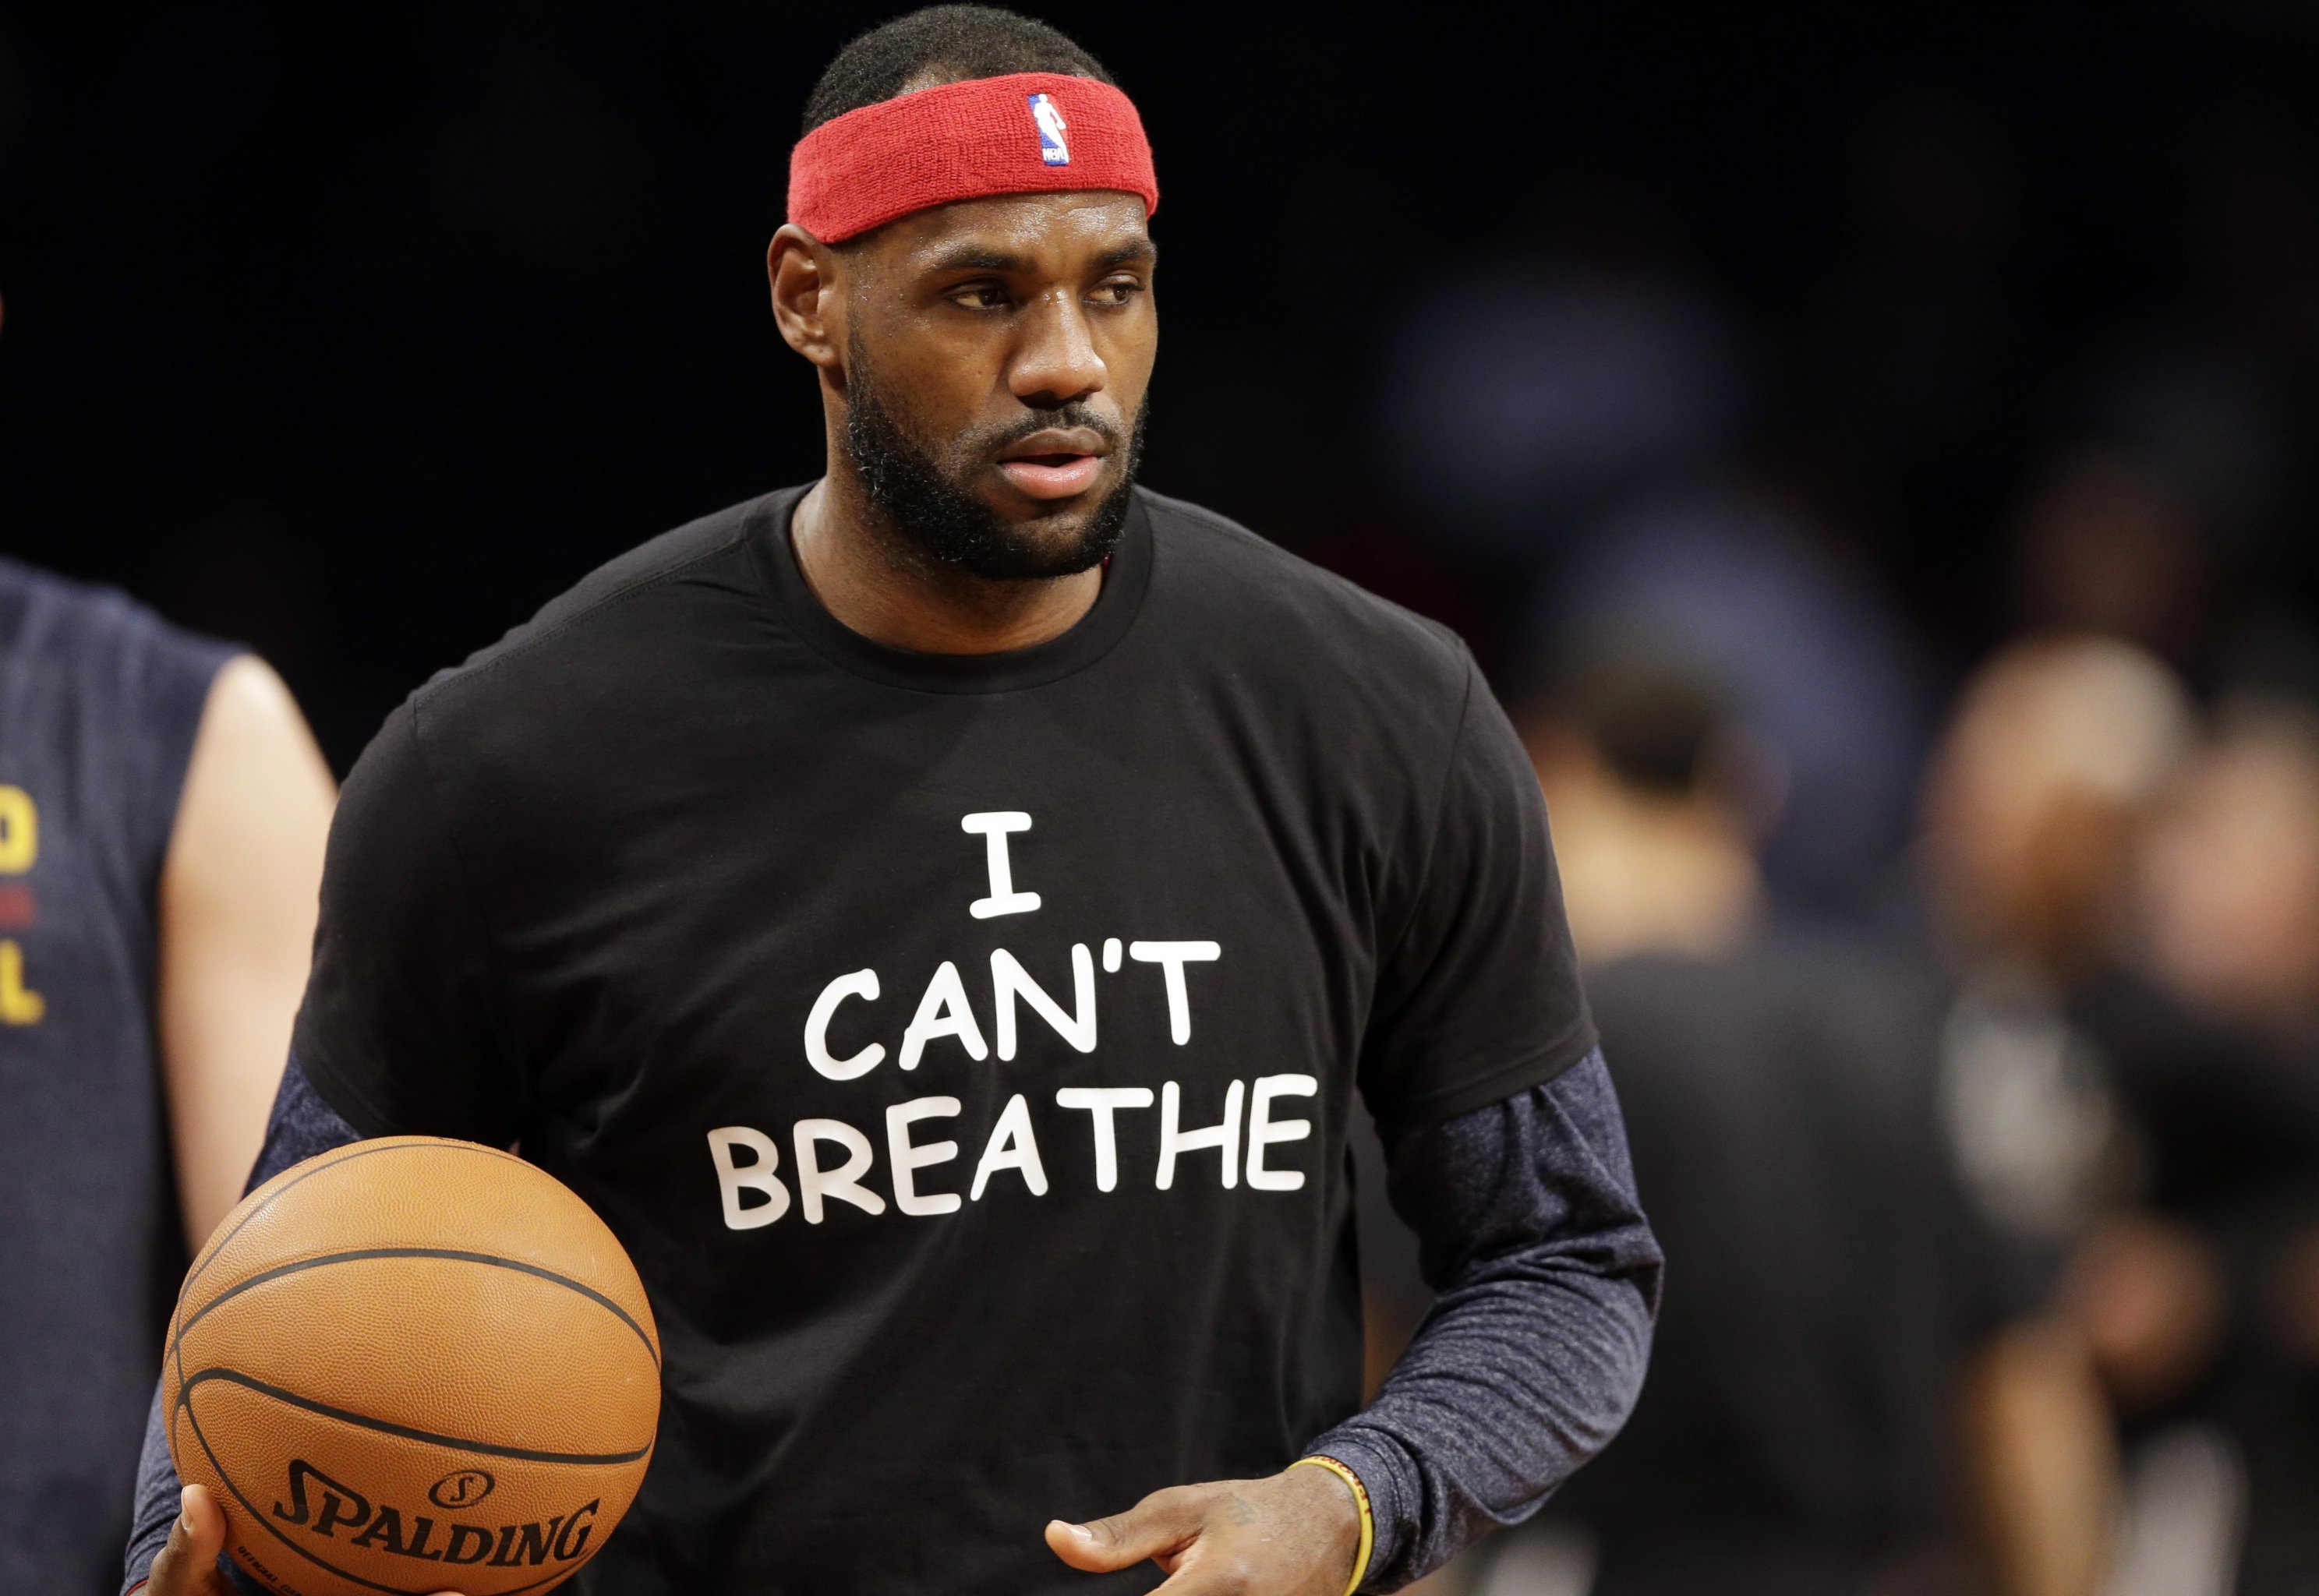 Report: LeBron to wear No. 23 for 1 more season after Nike denies request